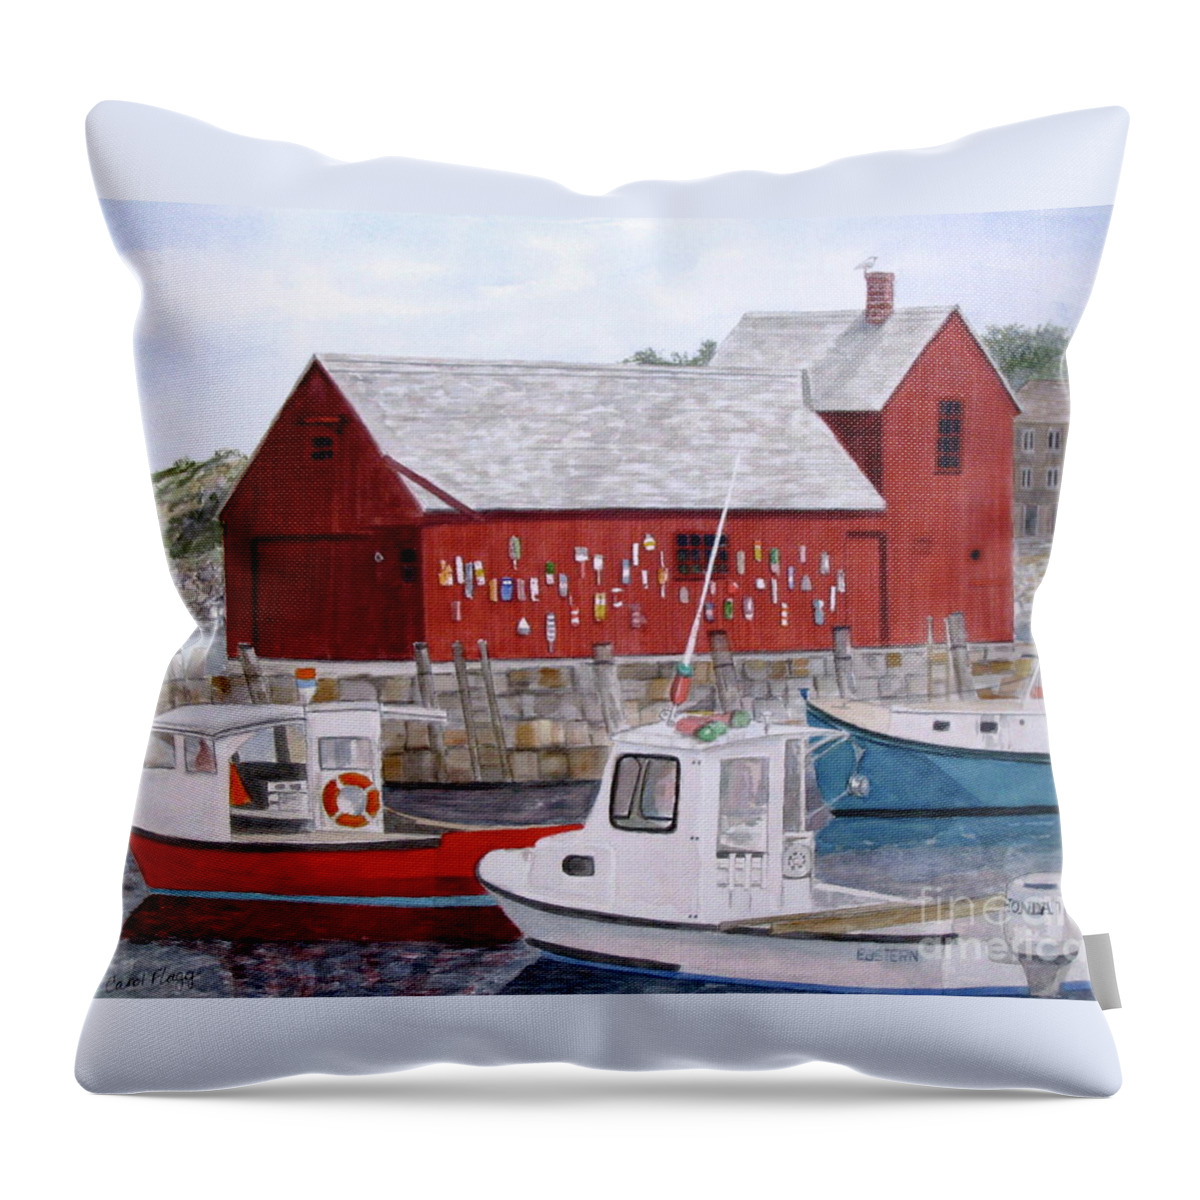 Motif #1 Throw Pillow featuring the painting Motif No 1 by Carol Flagg